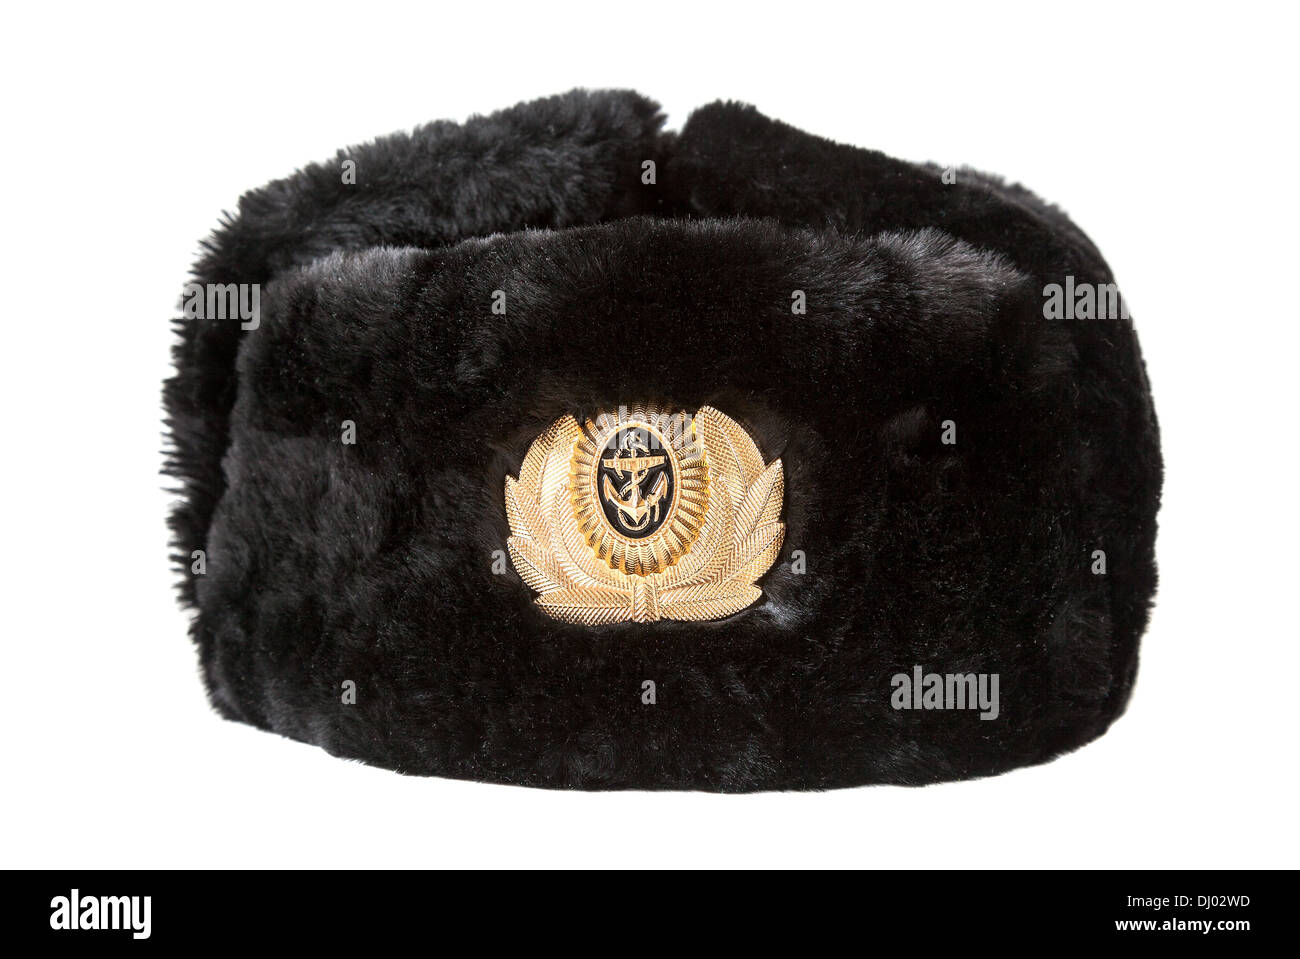 Russian navy officer's winter hat isolated on white background Stock Photo